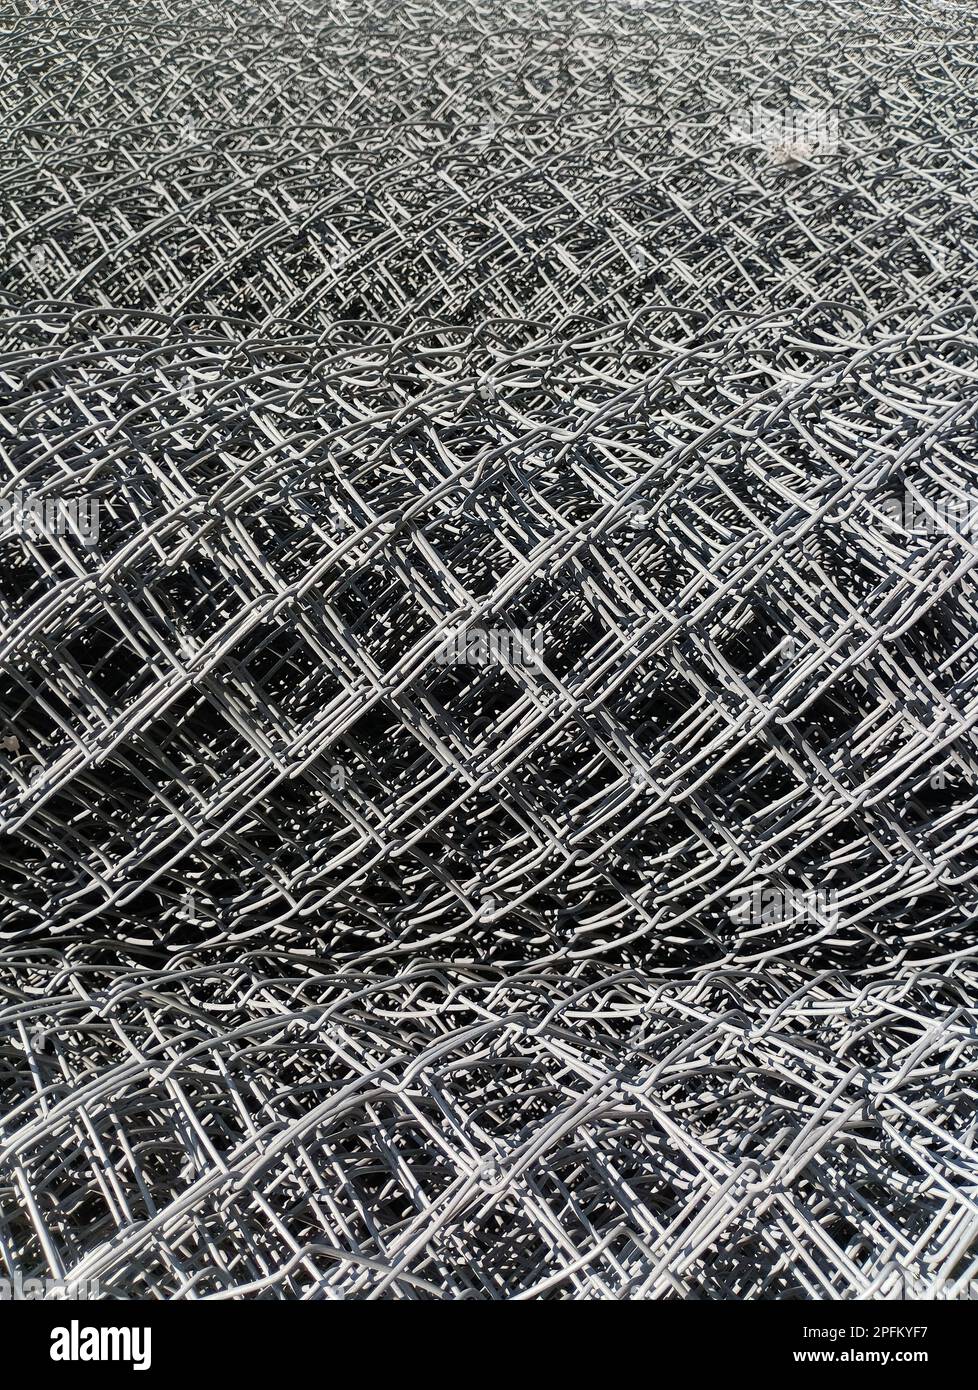 Metal wire in rolls close-up Stock Photo